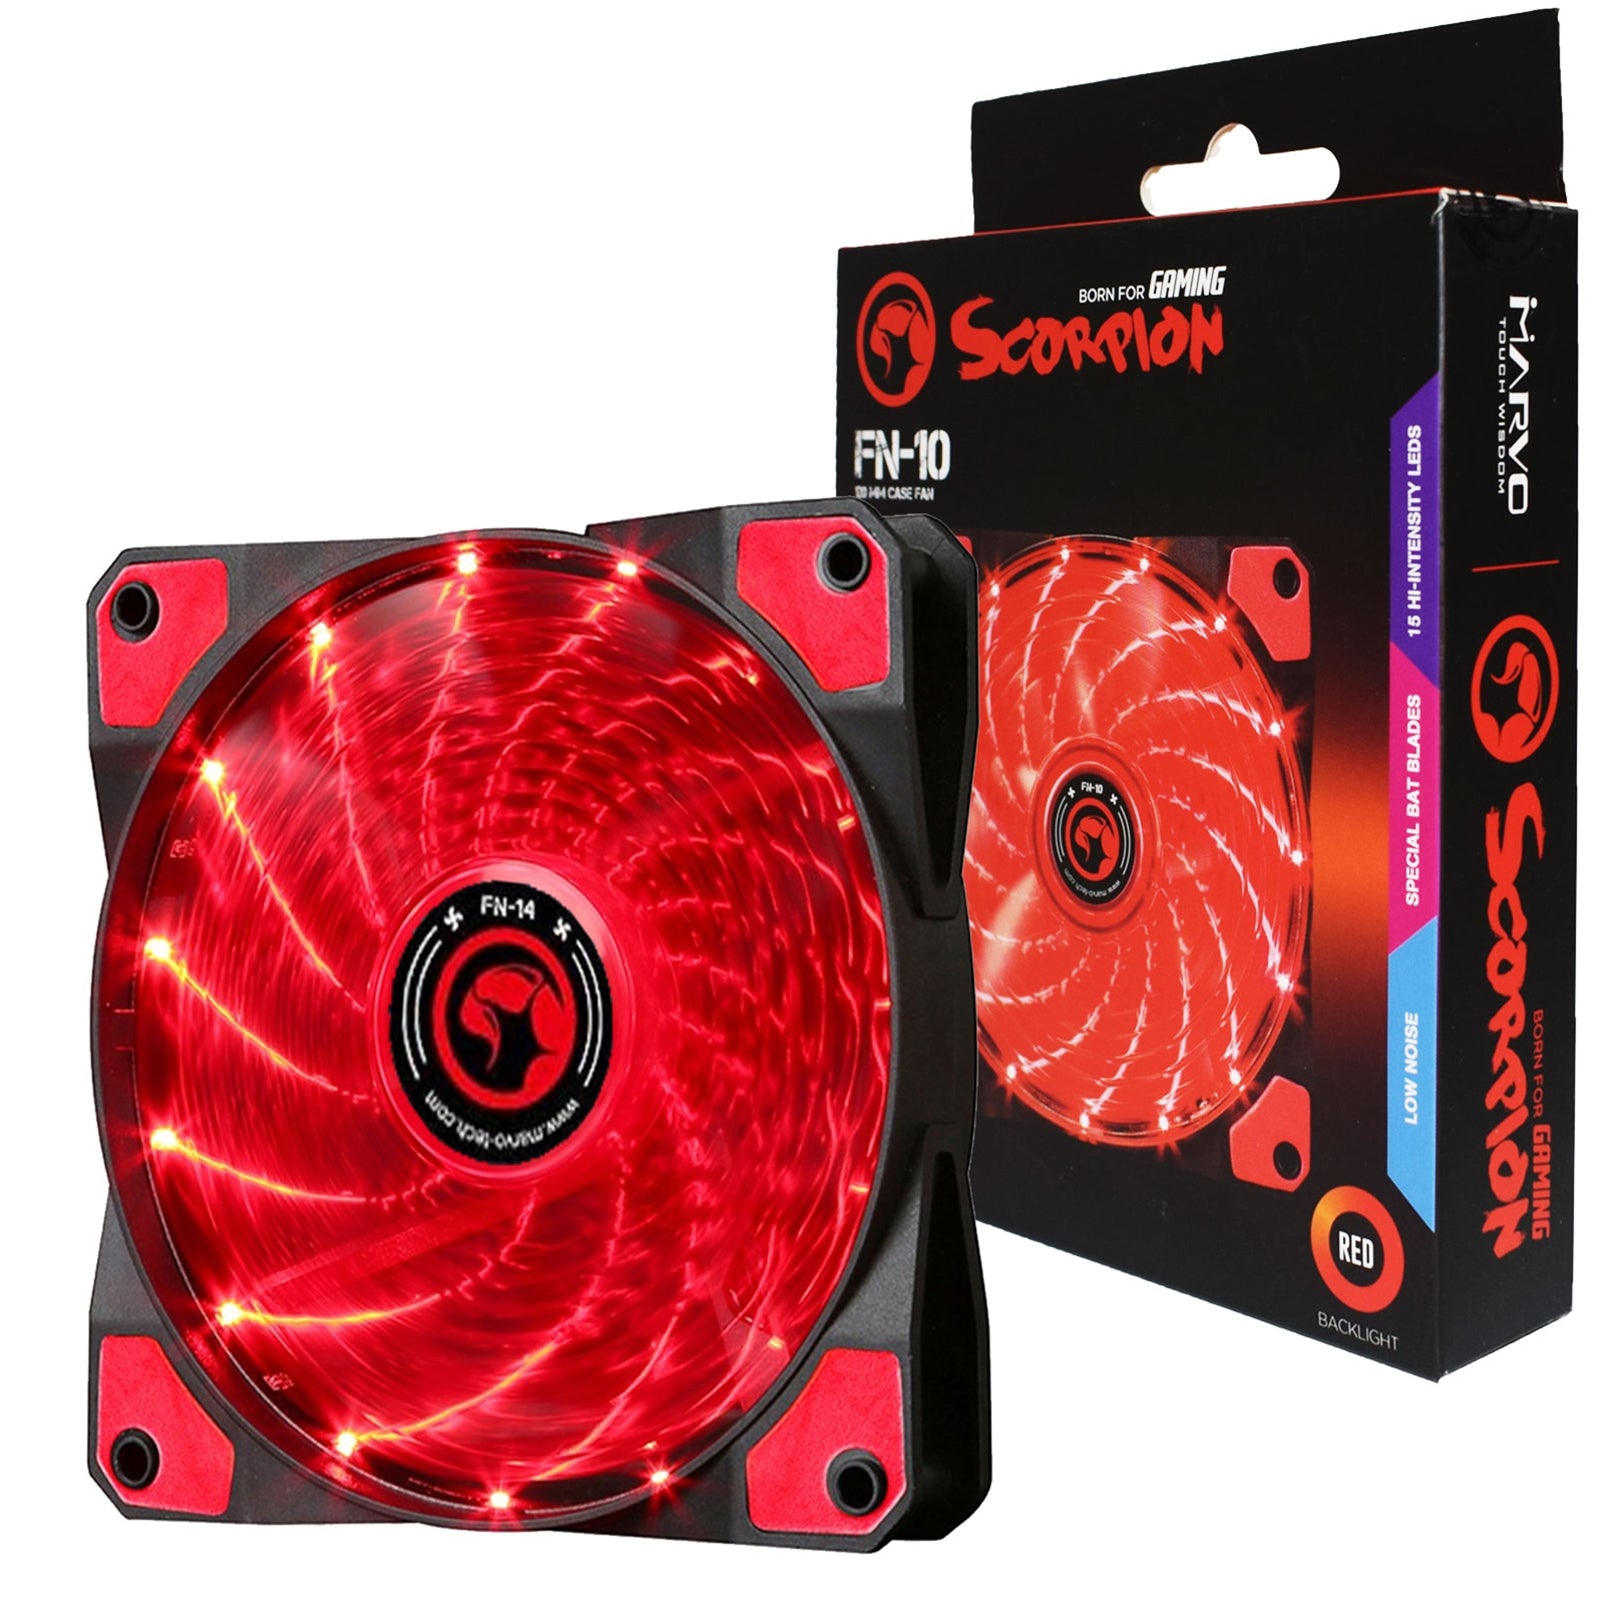 Marvo Scorpion FN-10 Red 120mm 1200RPM Red LED Gaming Fan